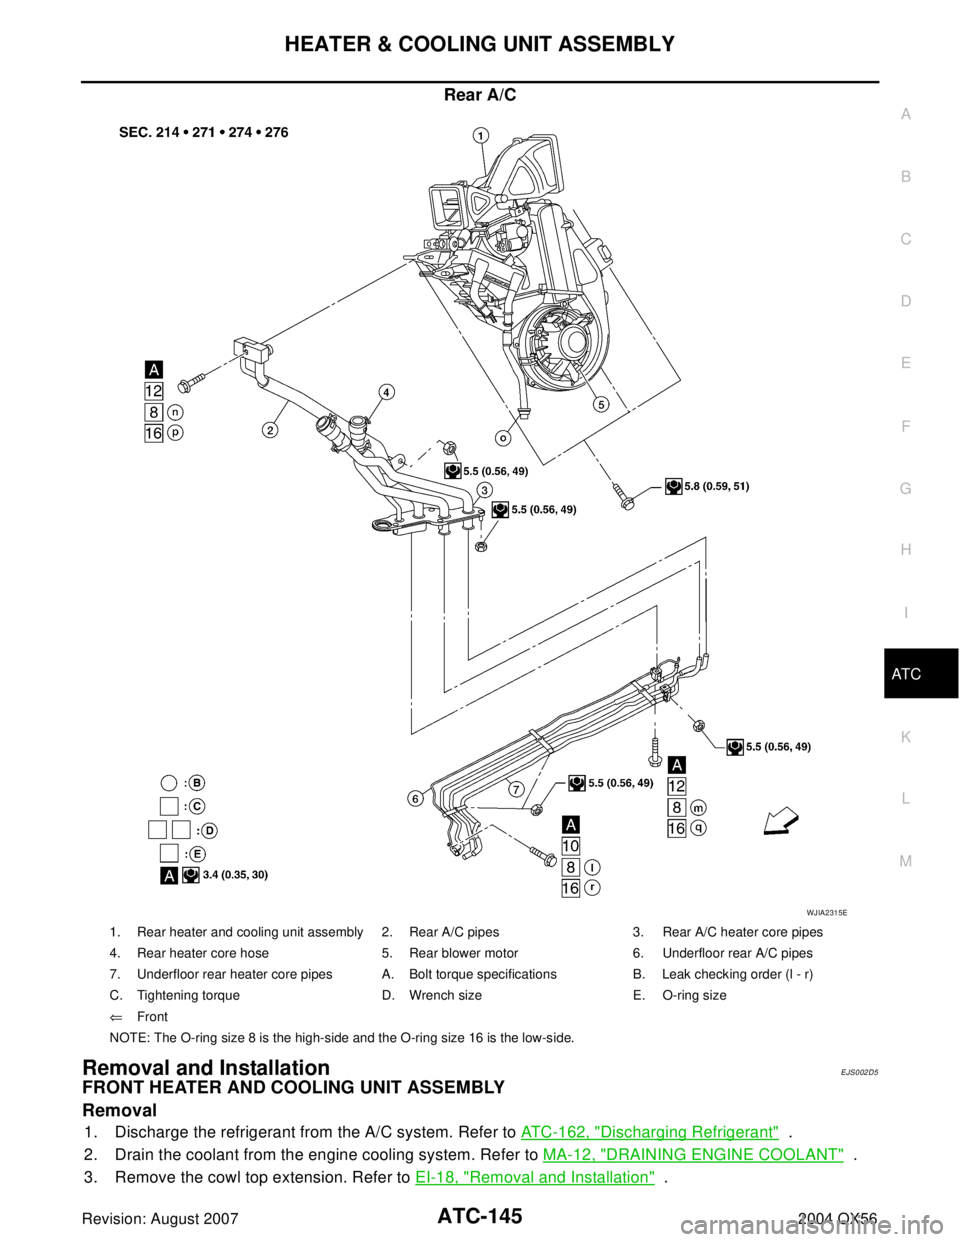 INFINITI QX56 2004  Factory Service Manual HEATER & COOLING UNIT ASSEMBLY
ATC-145
C
D
E
F
G
H
I
K
L
MA
B
AT C
Revision: August 20072004 QX56
Rear A/C
Removal and InstallationEJS002D5
FRONT HEATER AND COOLING UNIT ASSEMBLY
Removal
1. Discharge 